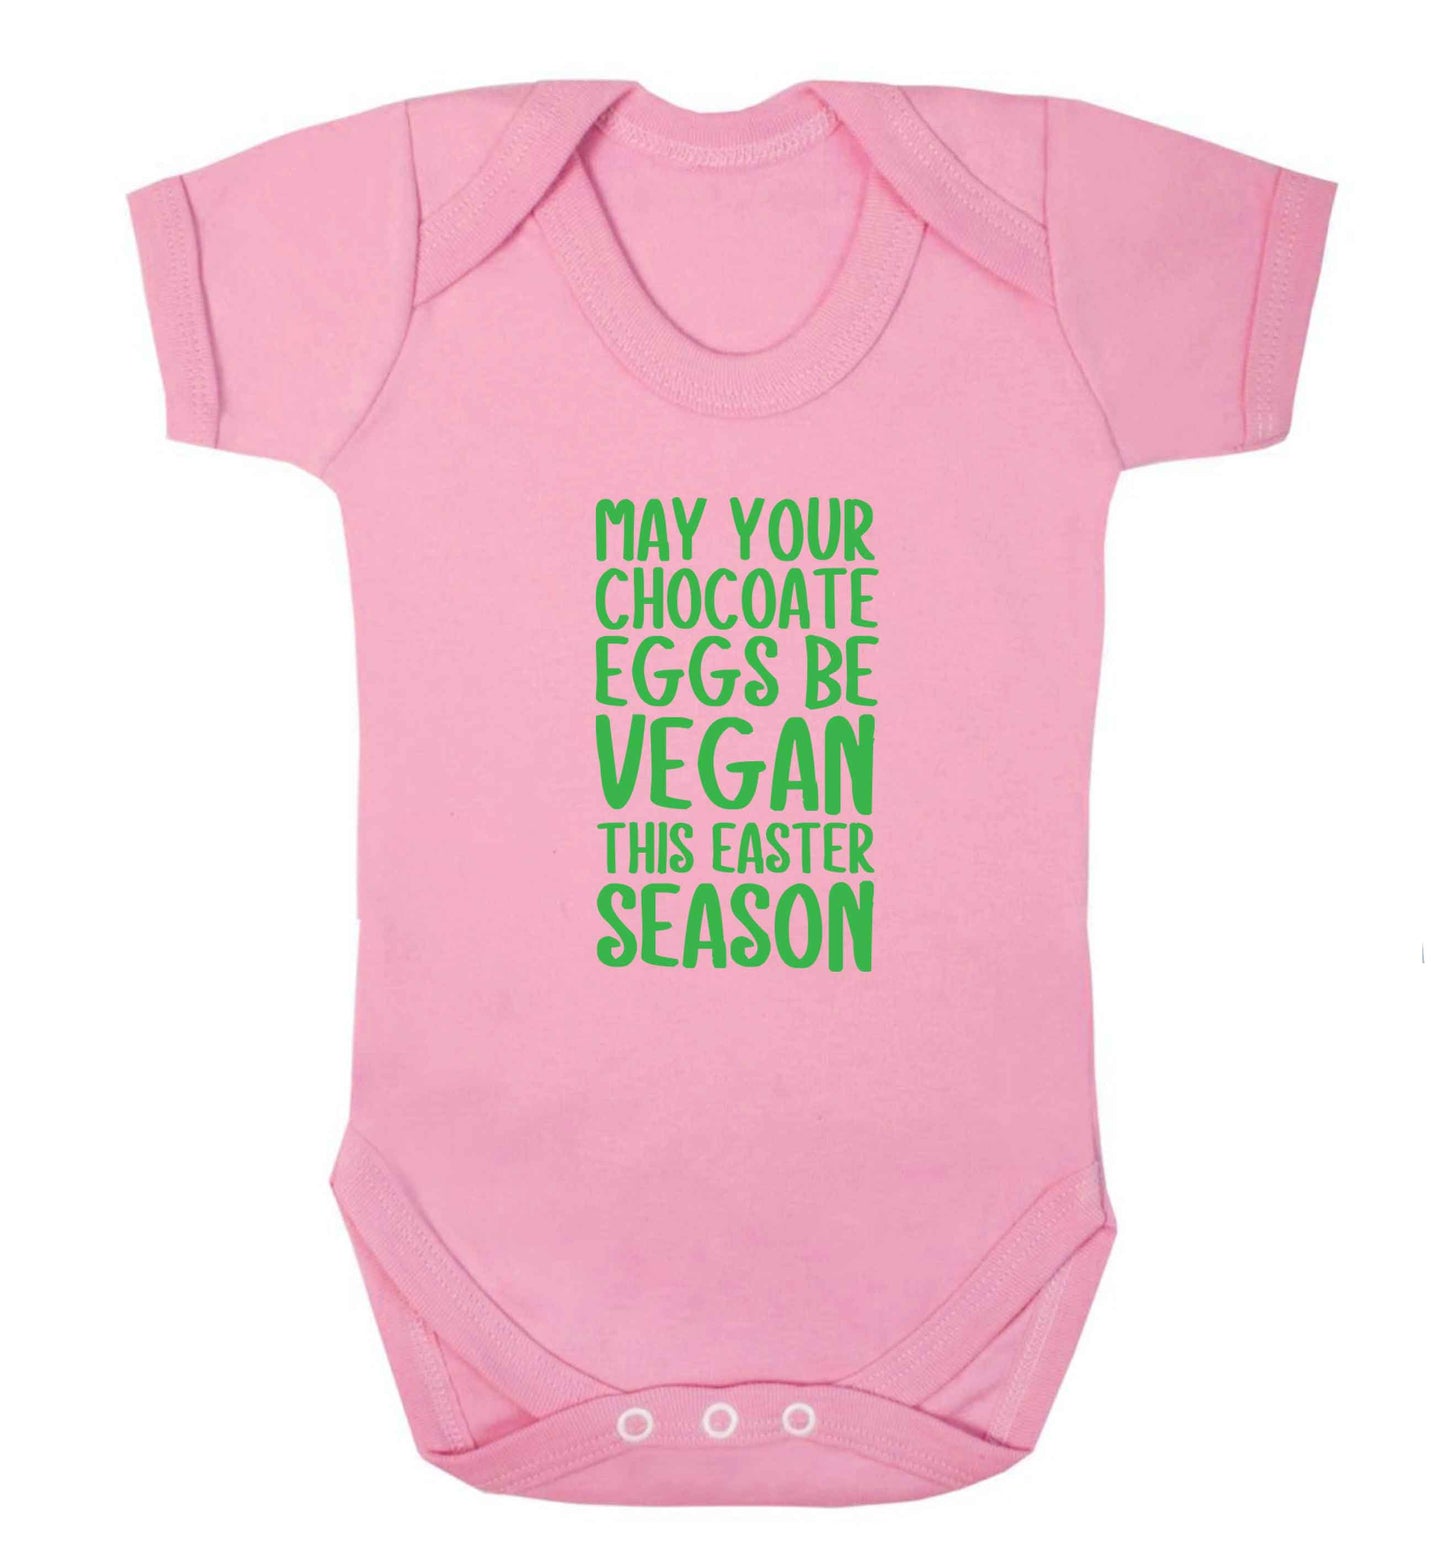 Easter bunny approved! Vegans will love this easter themed baby vest pale pink 18-24 months